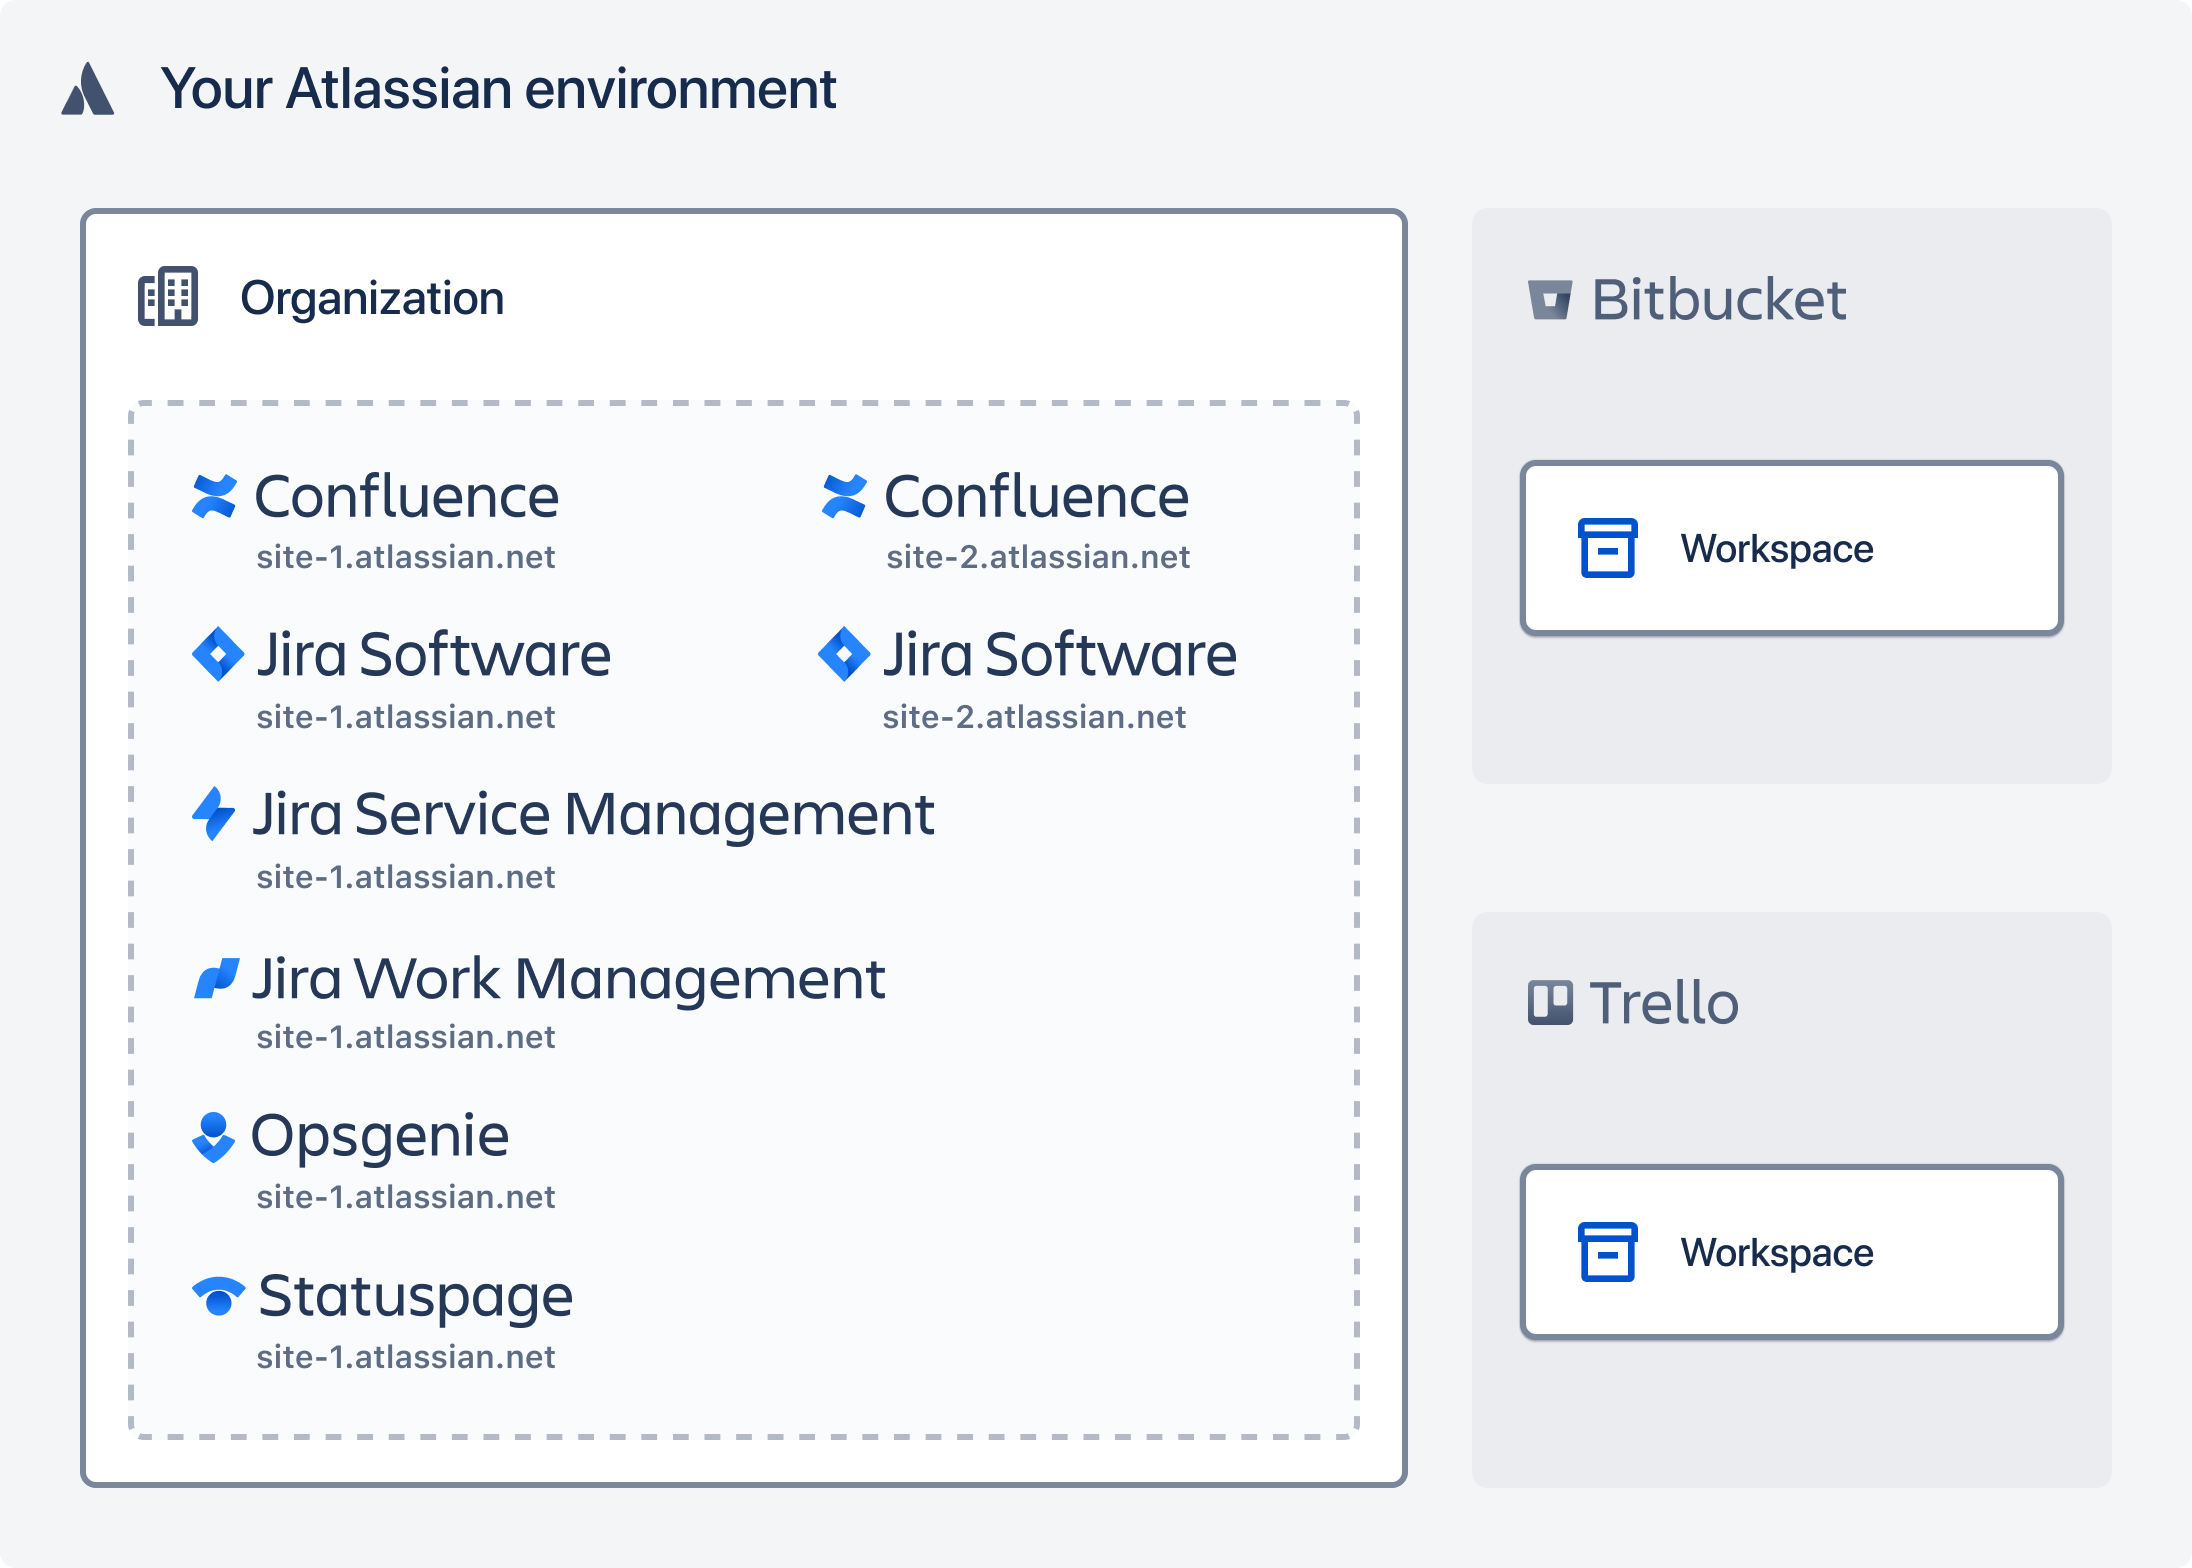 Your Atlassian environment with an organization that includes your products (no division into sites)